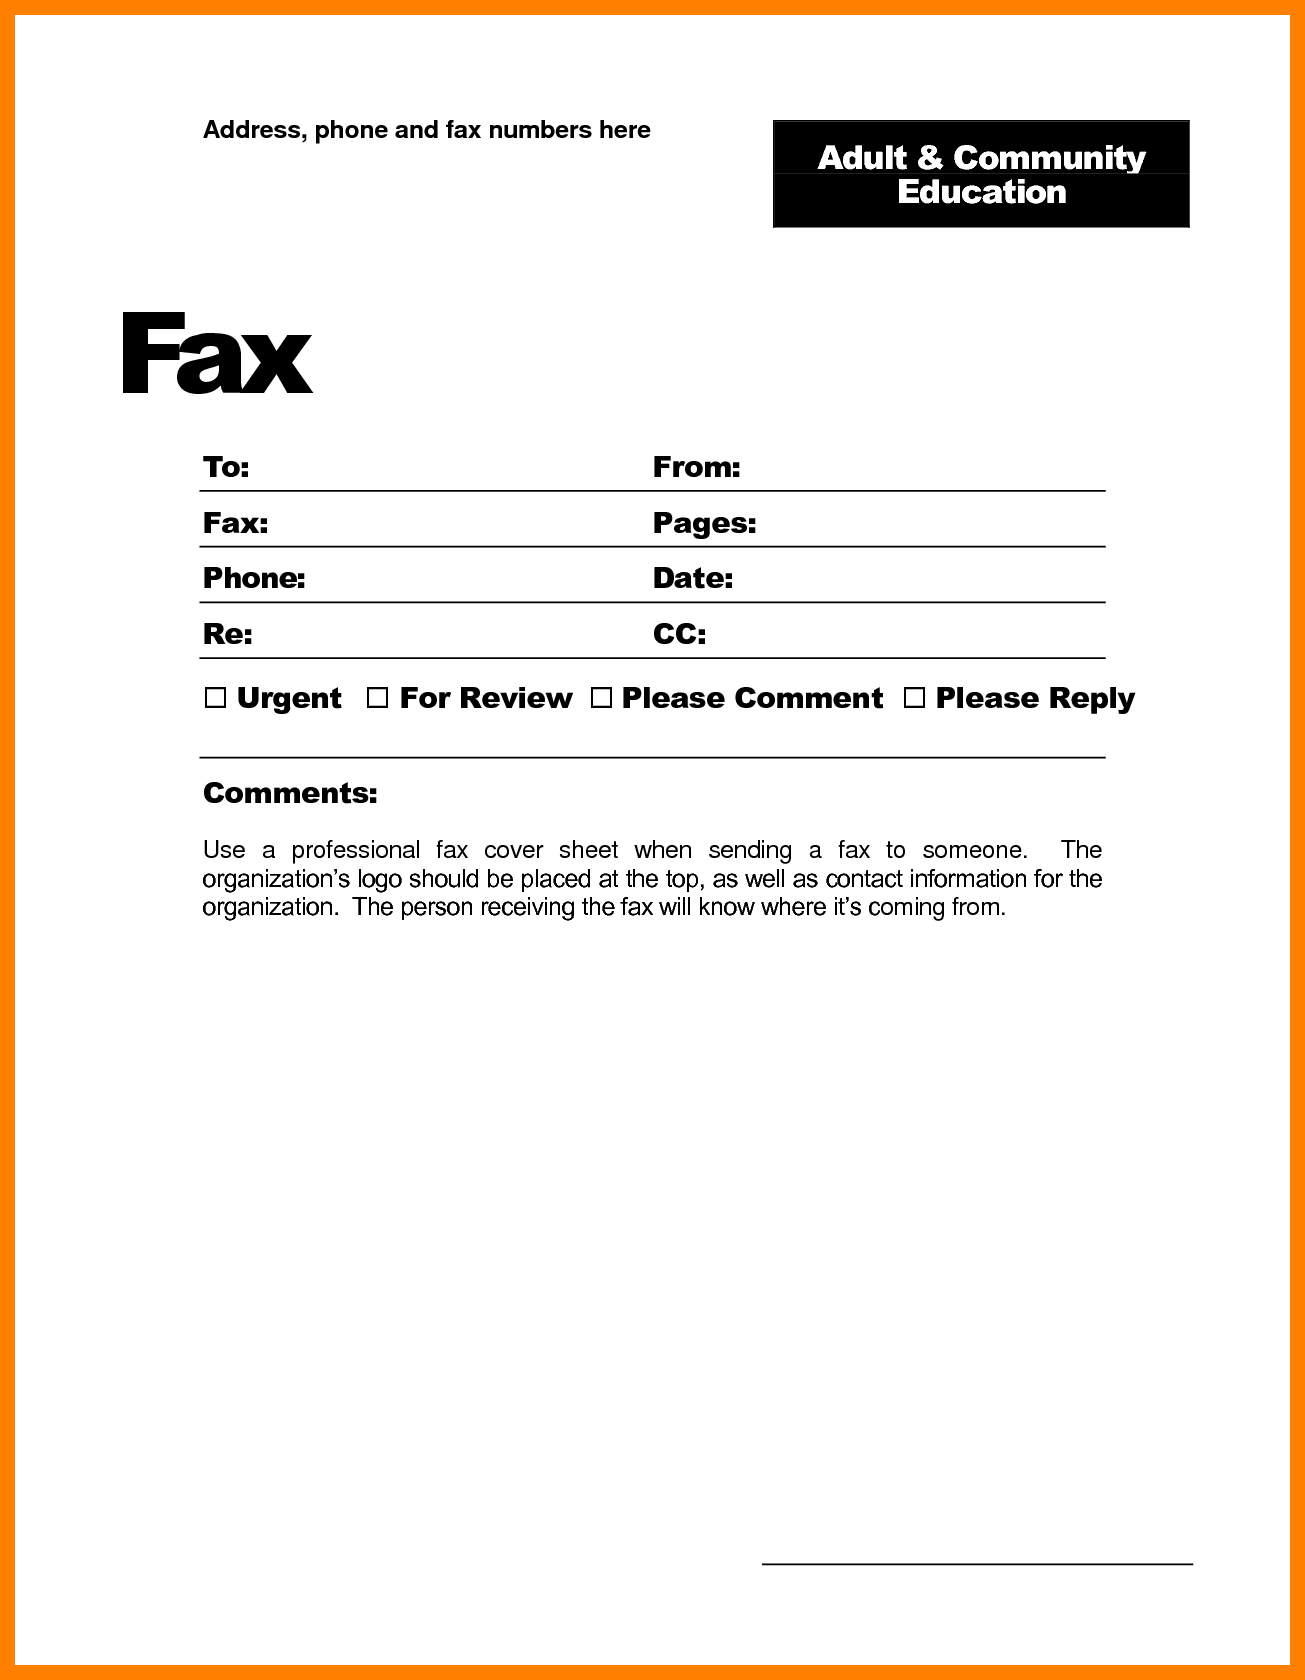 Fax Cover Sheet Download Free Fax Cover Sheet. Professional/ Personal